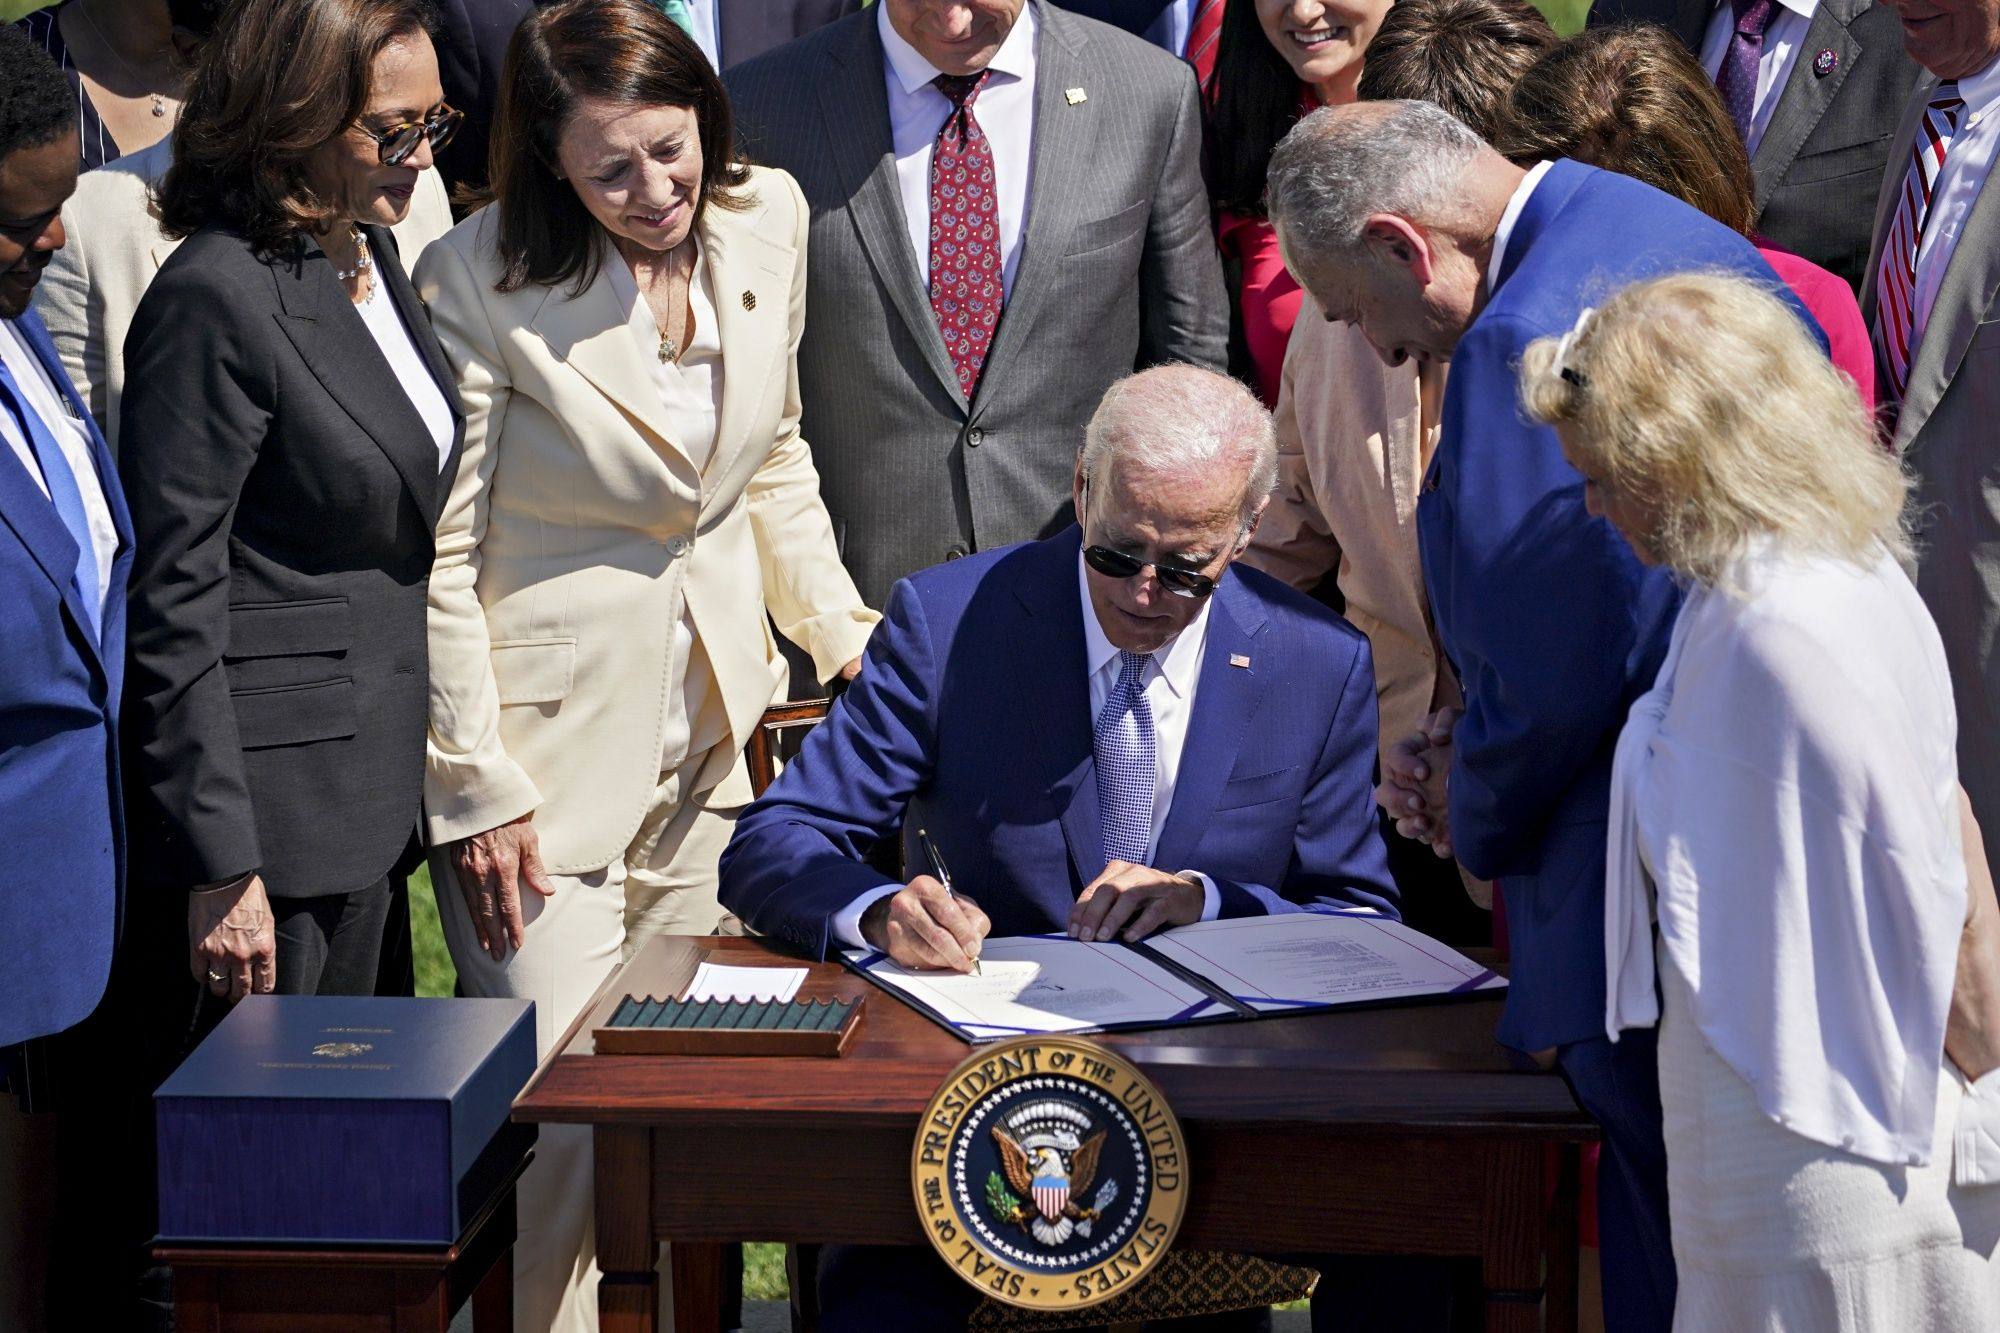 US President Joe Biden signs the Chips and Science Act of 2022, during a ceremony on the South Lawn of the White House in Washington, D.C., Aug. 9, 2022. Photo: Bloomberg